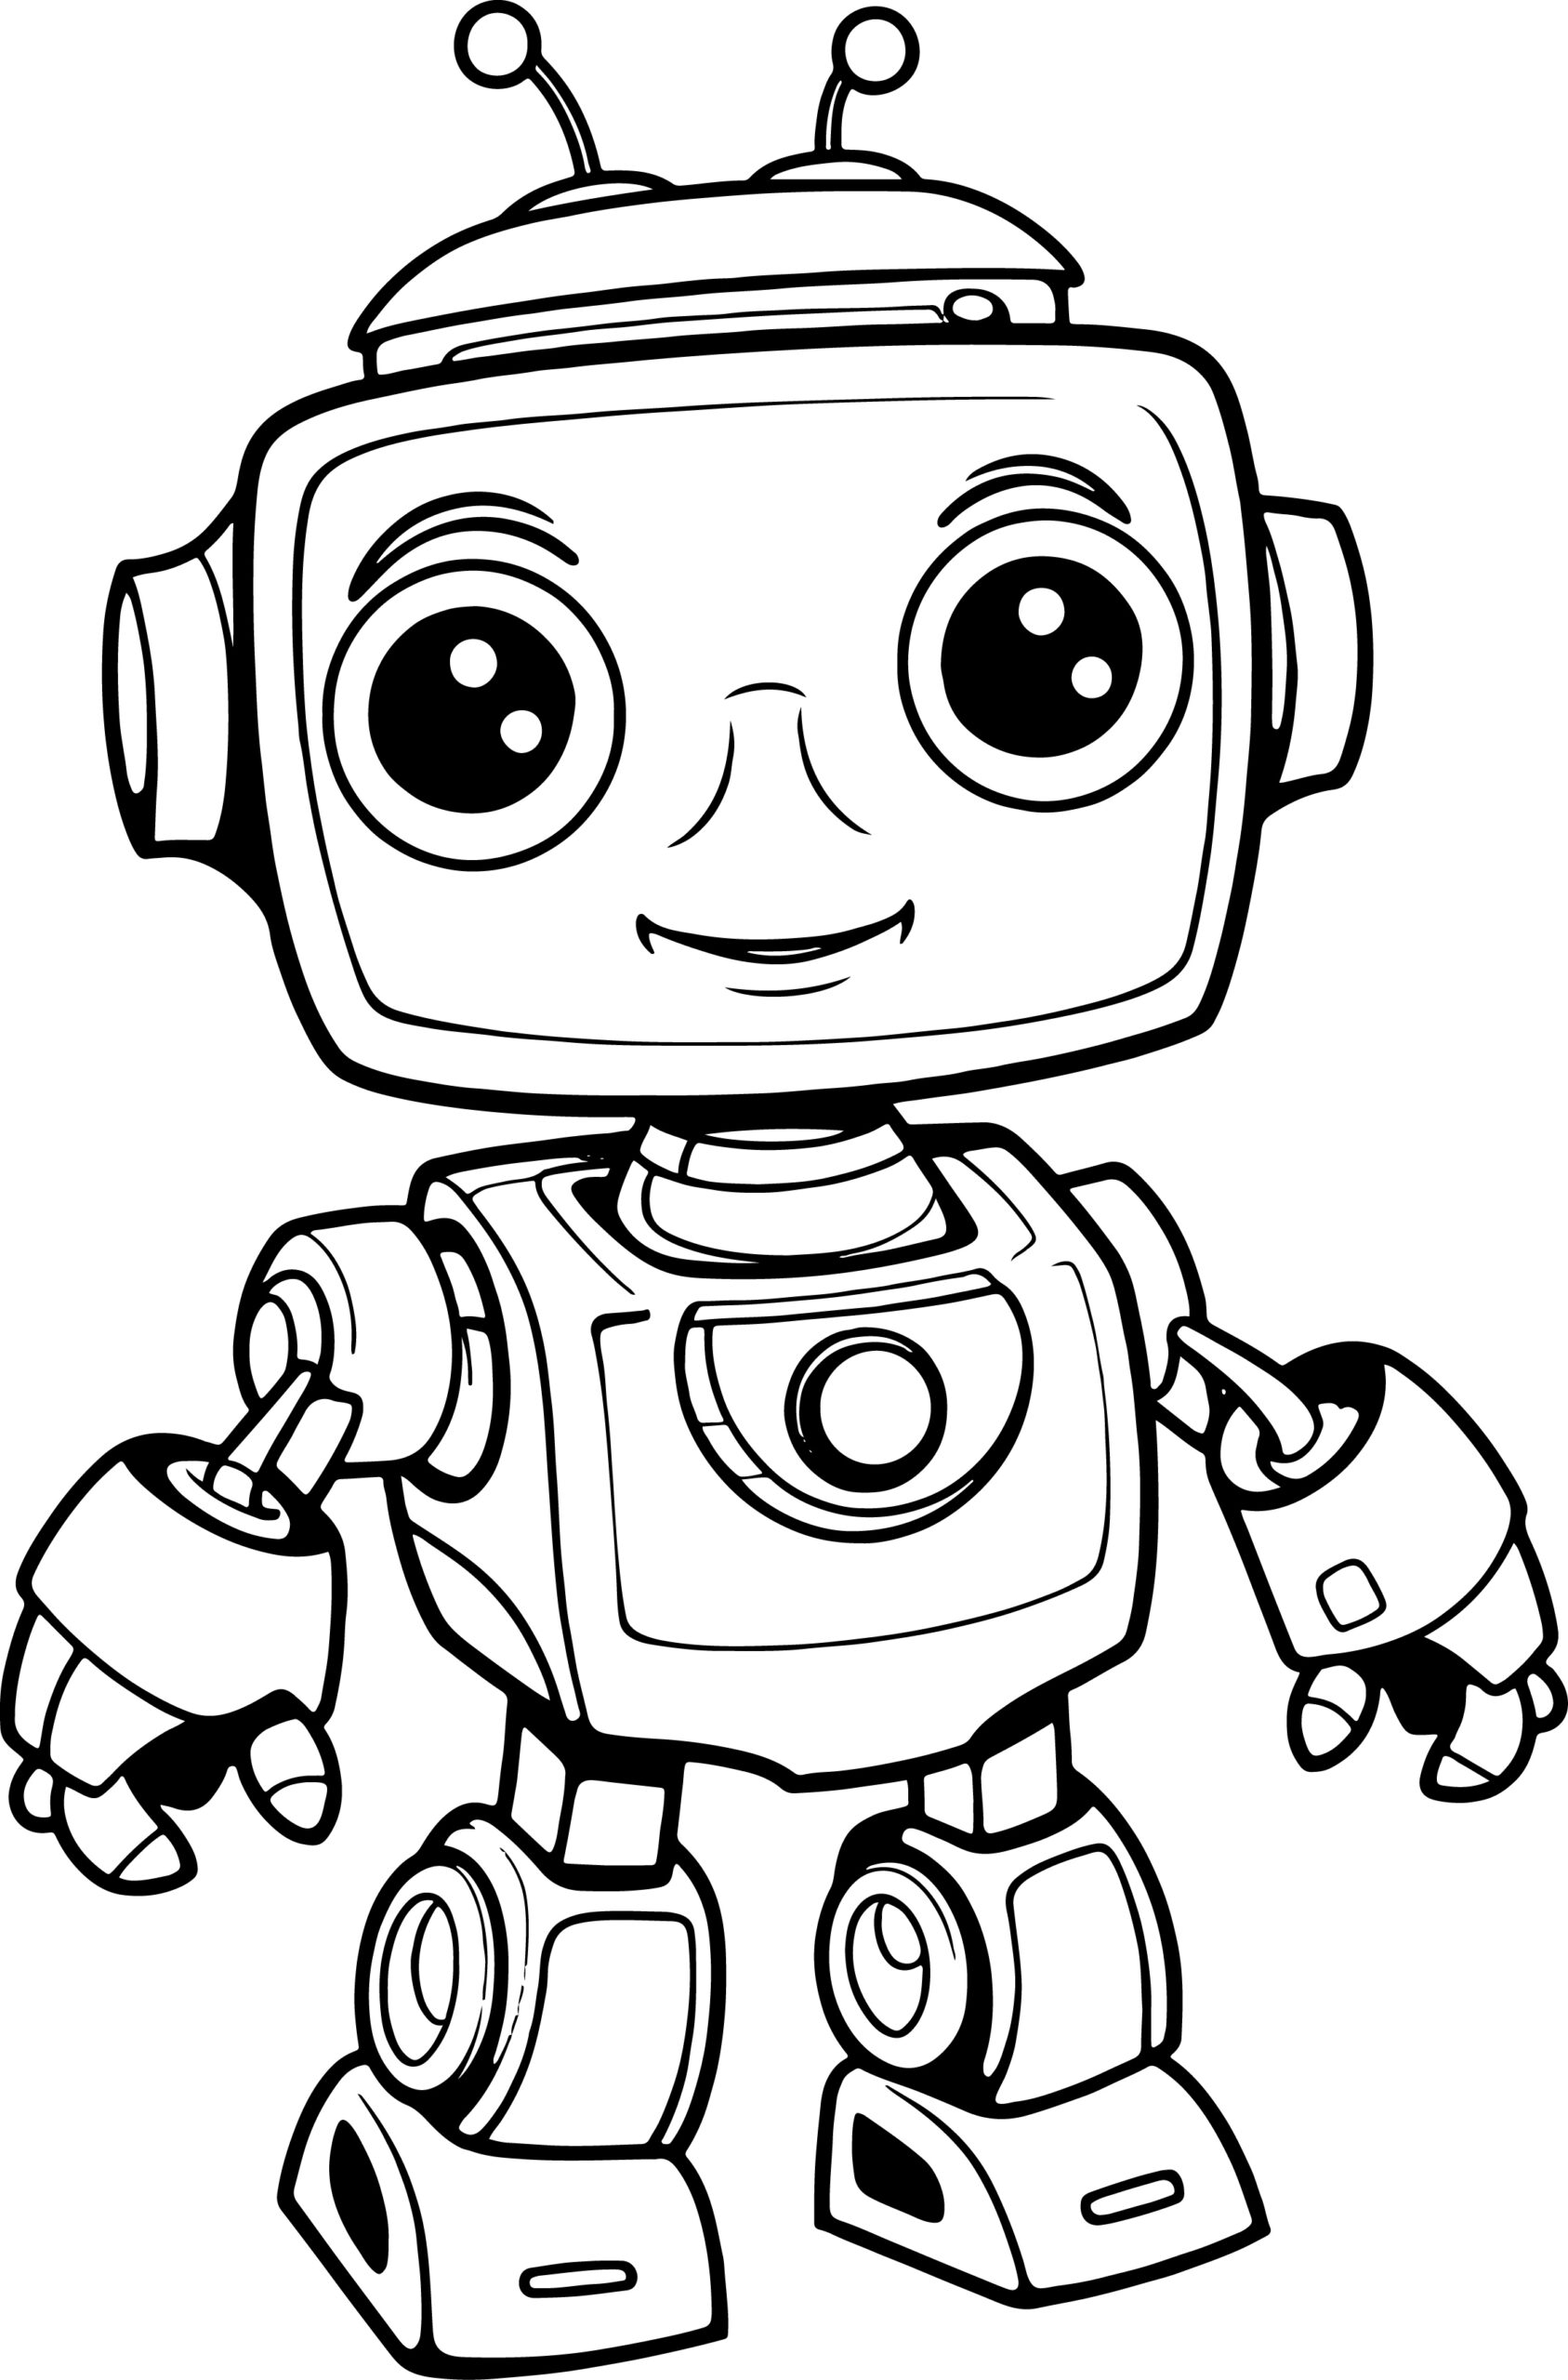 Robot coloring book easy fun robot pages book for kids made by teachers